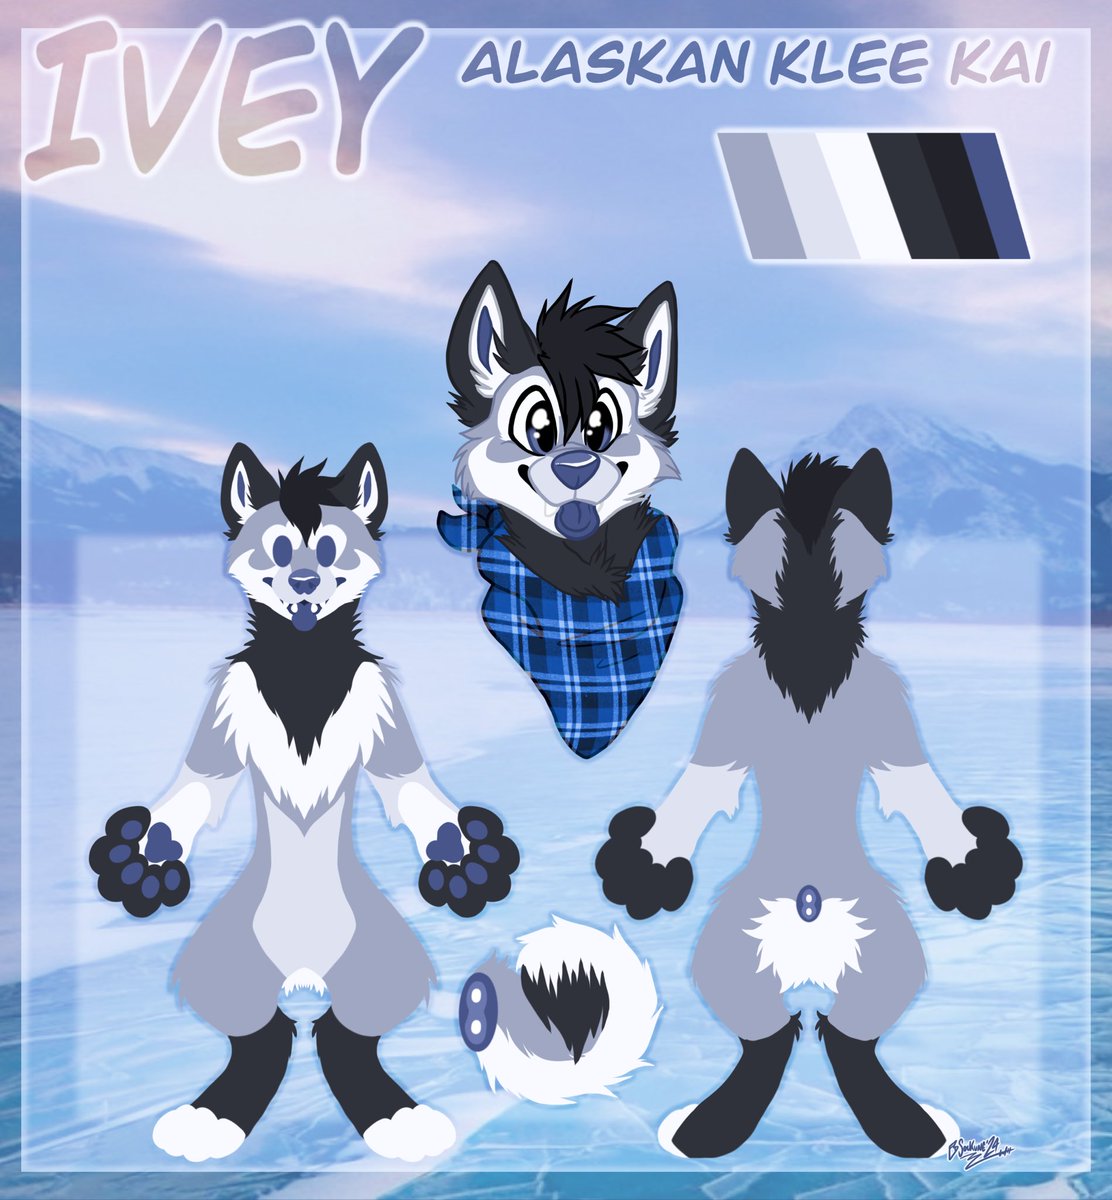 Ivey the Alaskan Klee Kai is available for 💲7️⃣5️⃣ or best offer!❄️
Reply or DM if you’re interested in adopting!

All interactions are greatly appreciated.💙✨